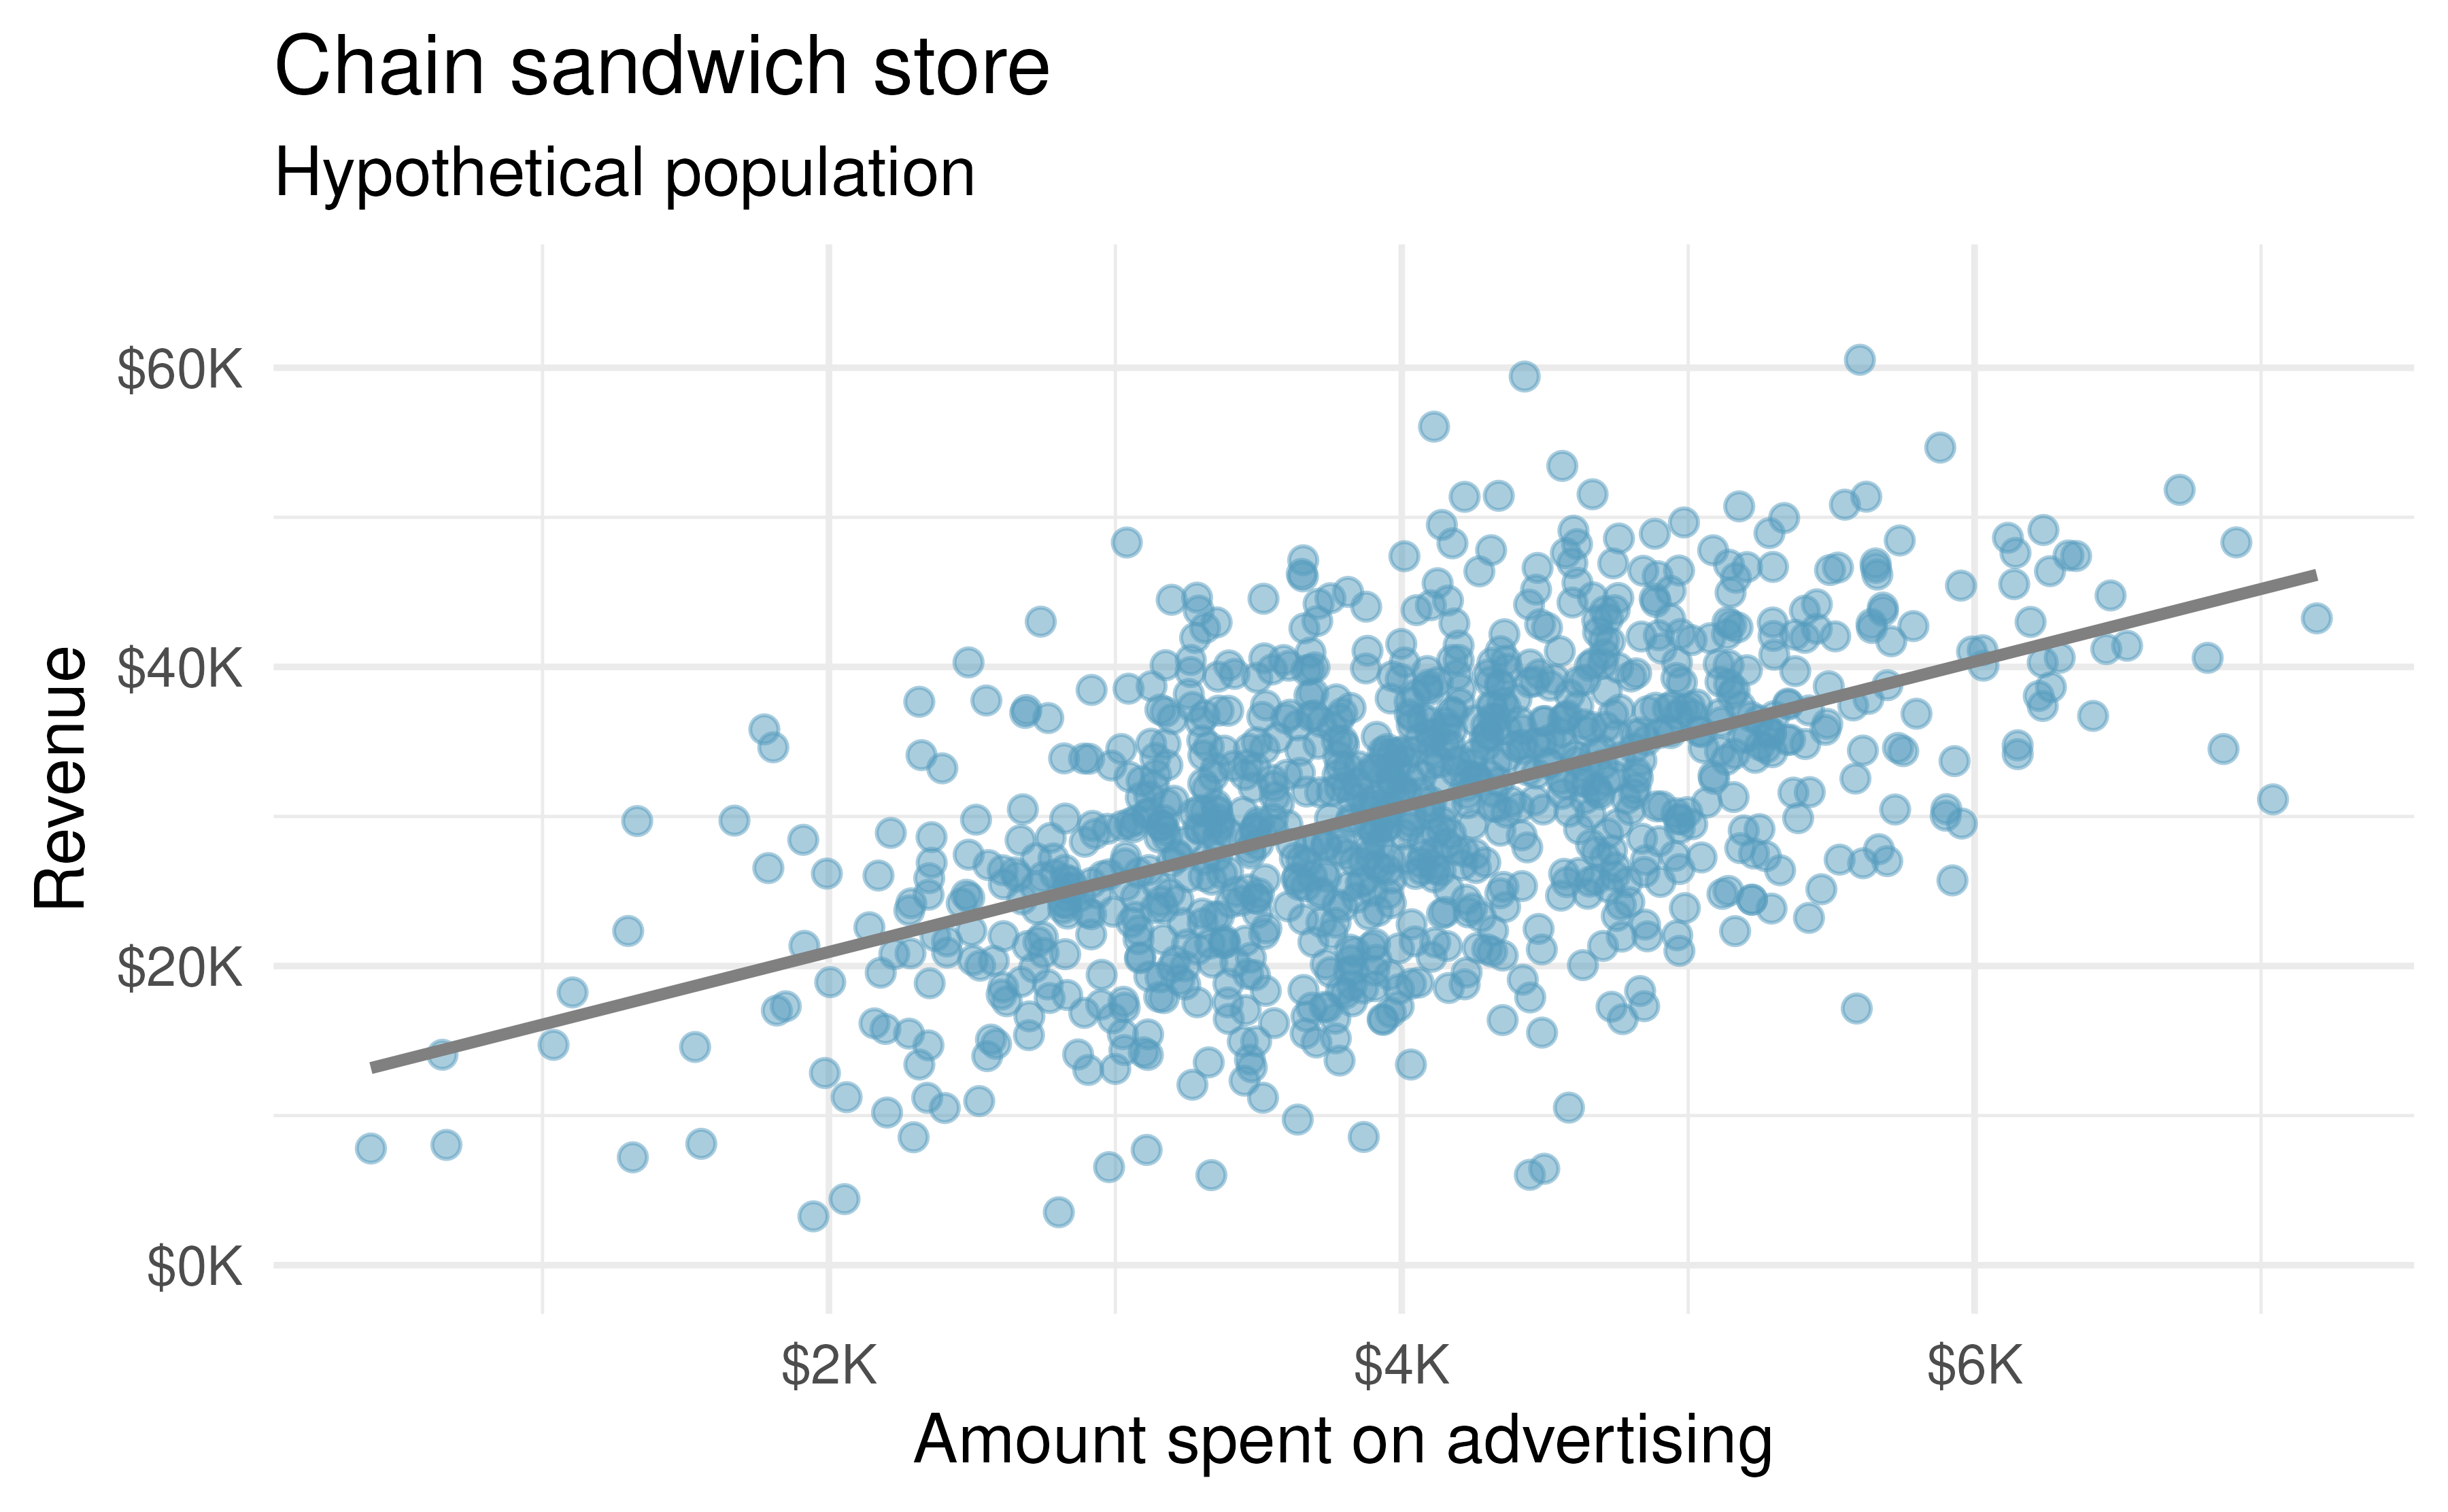 Revenue as a linear model of advertising dollars for a population of sandwich stores, in thousands of dollars.